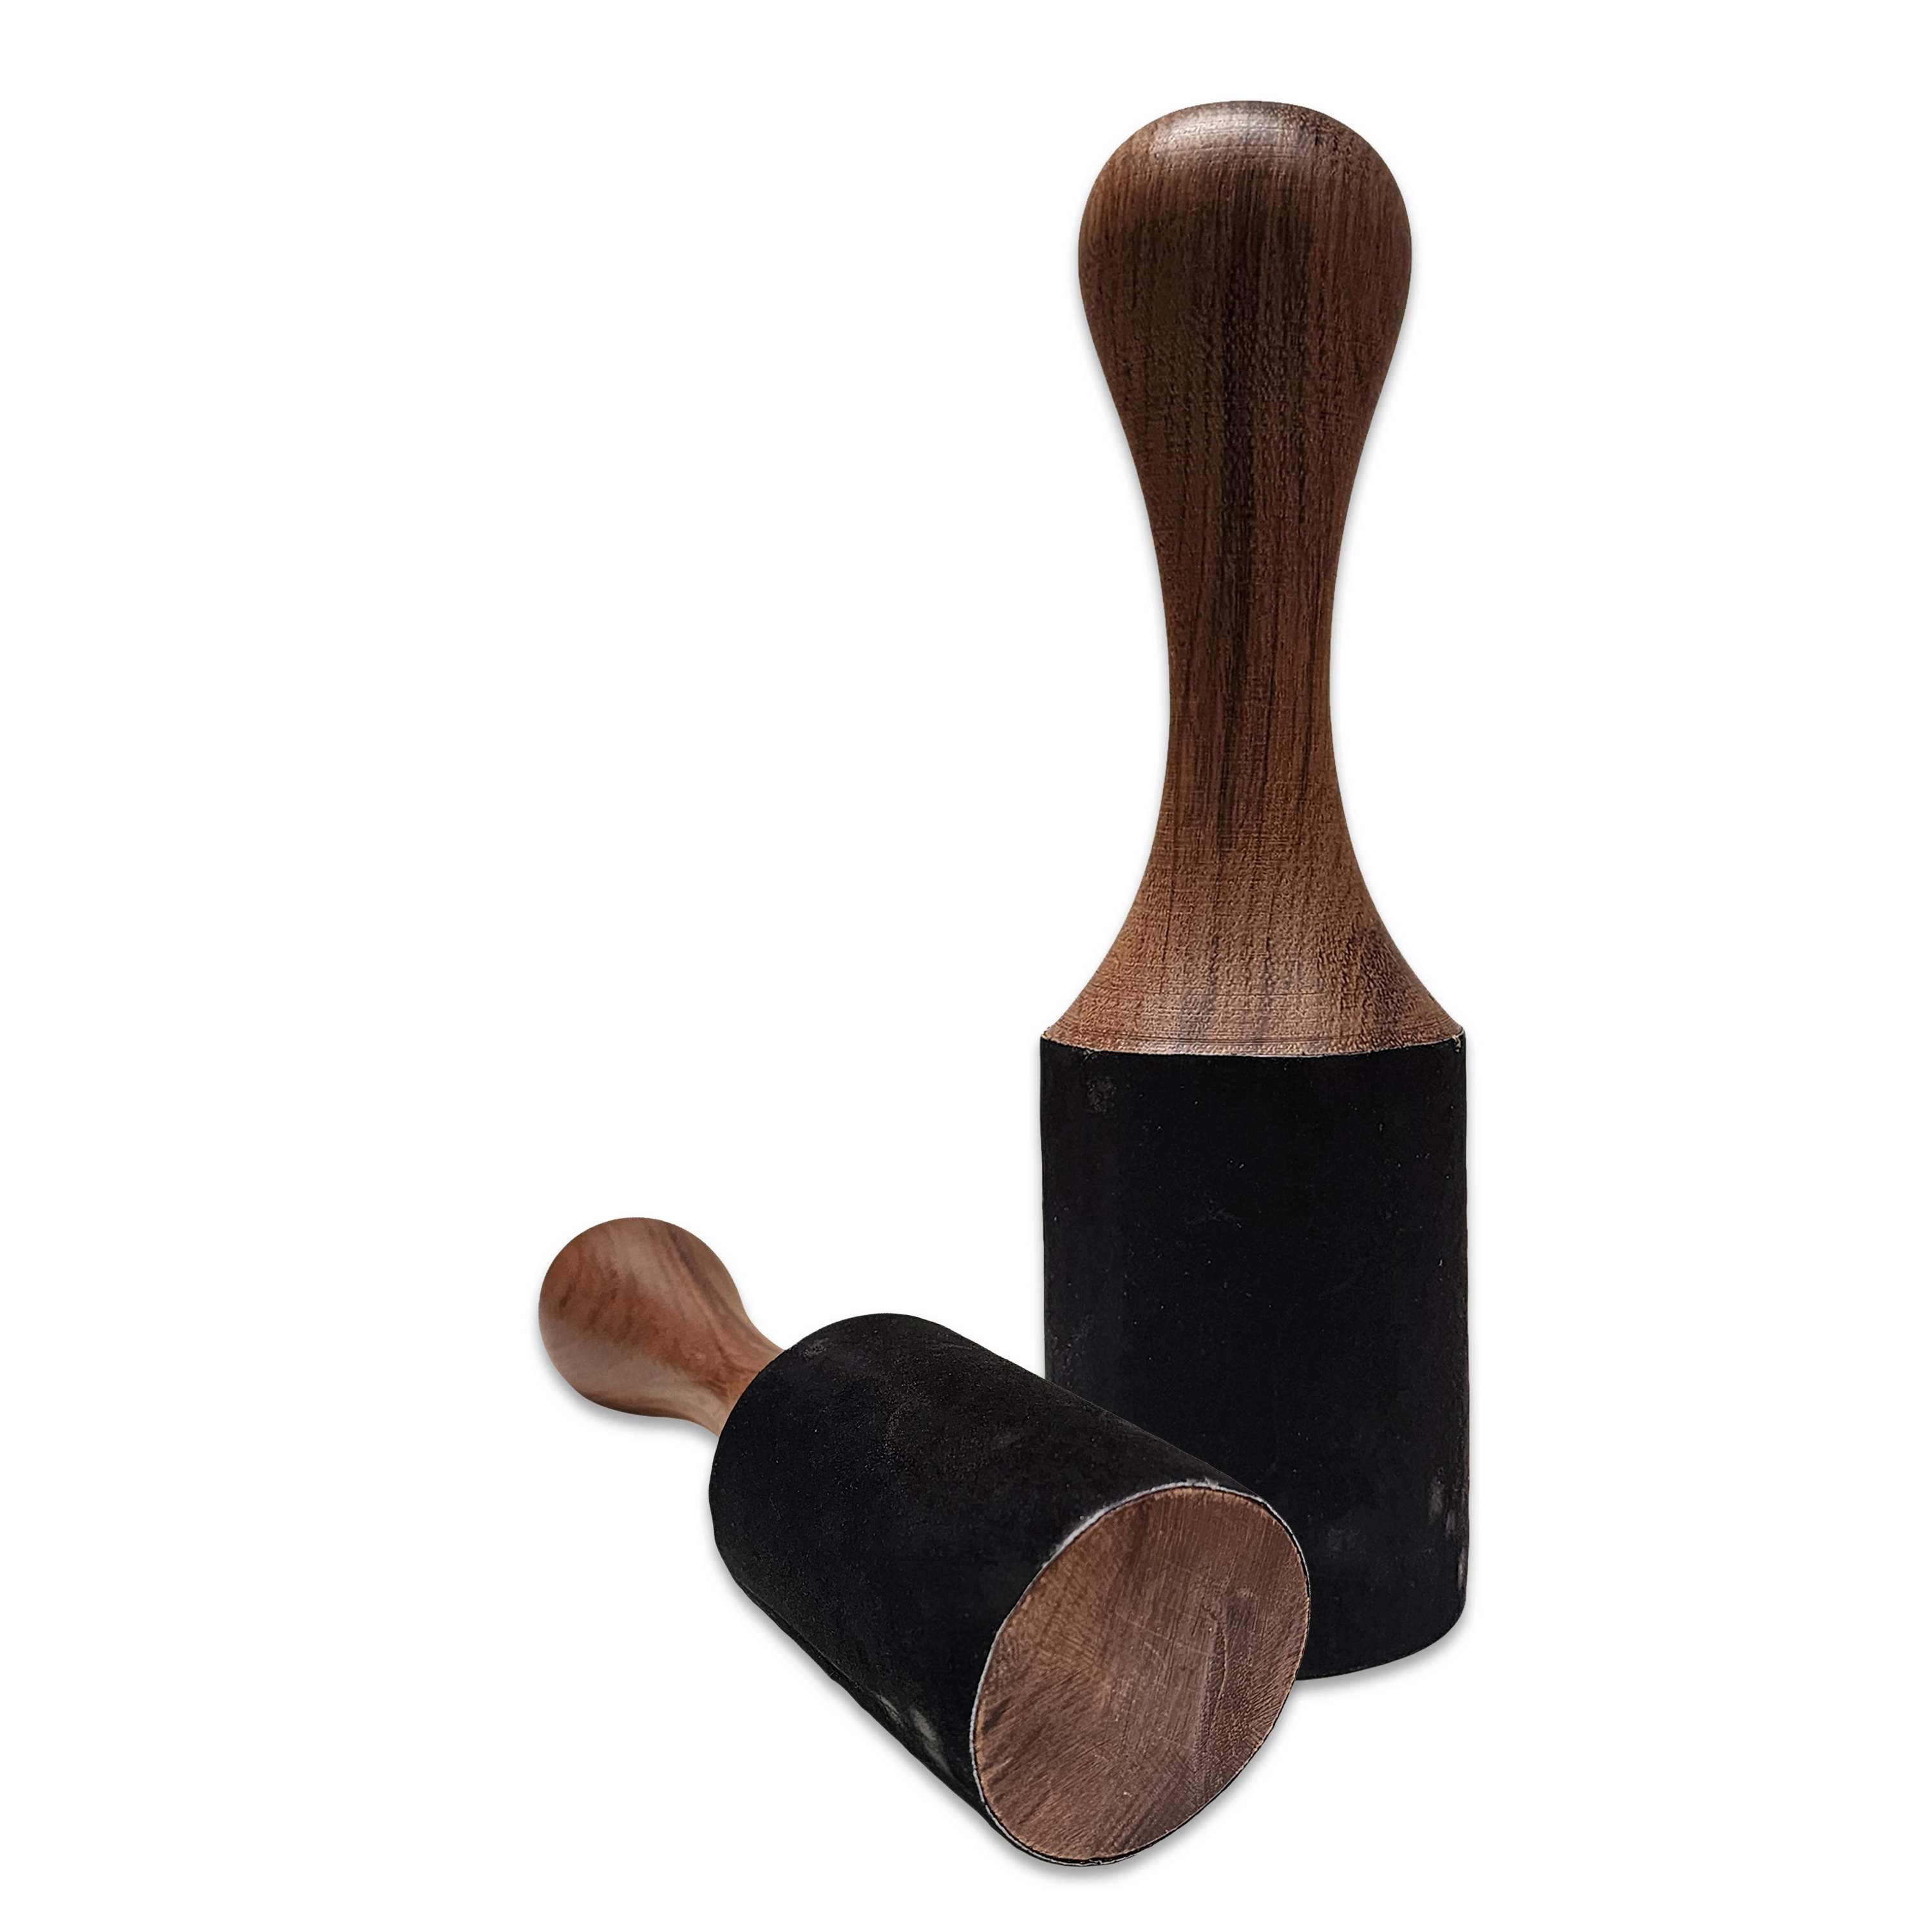 Singing Bowl Accessories, Wooden And Leather, Stroking And Playing Mallet, Large